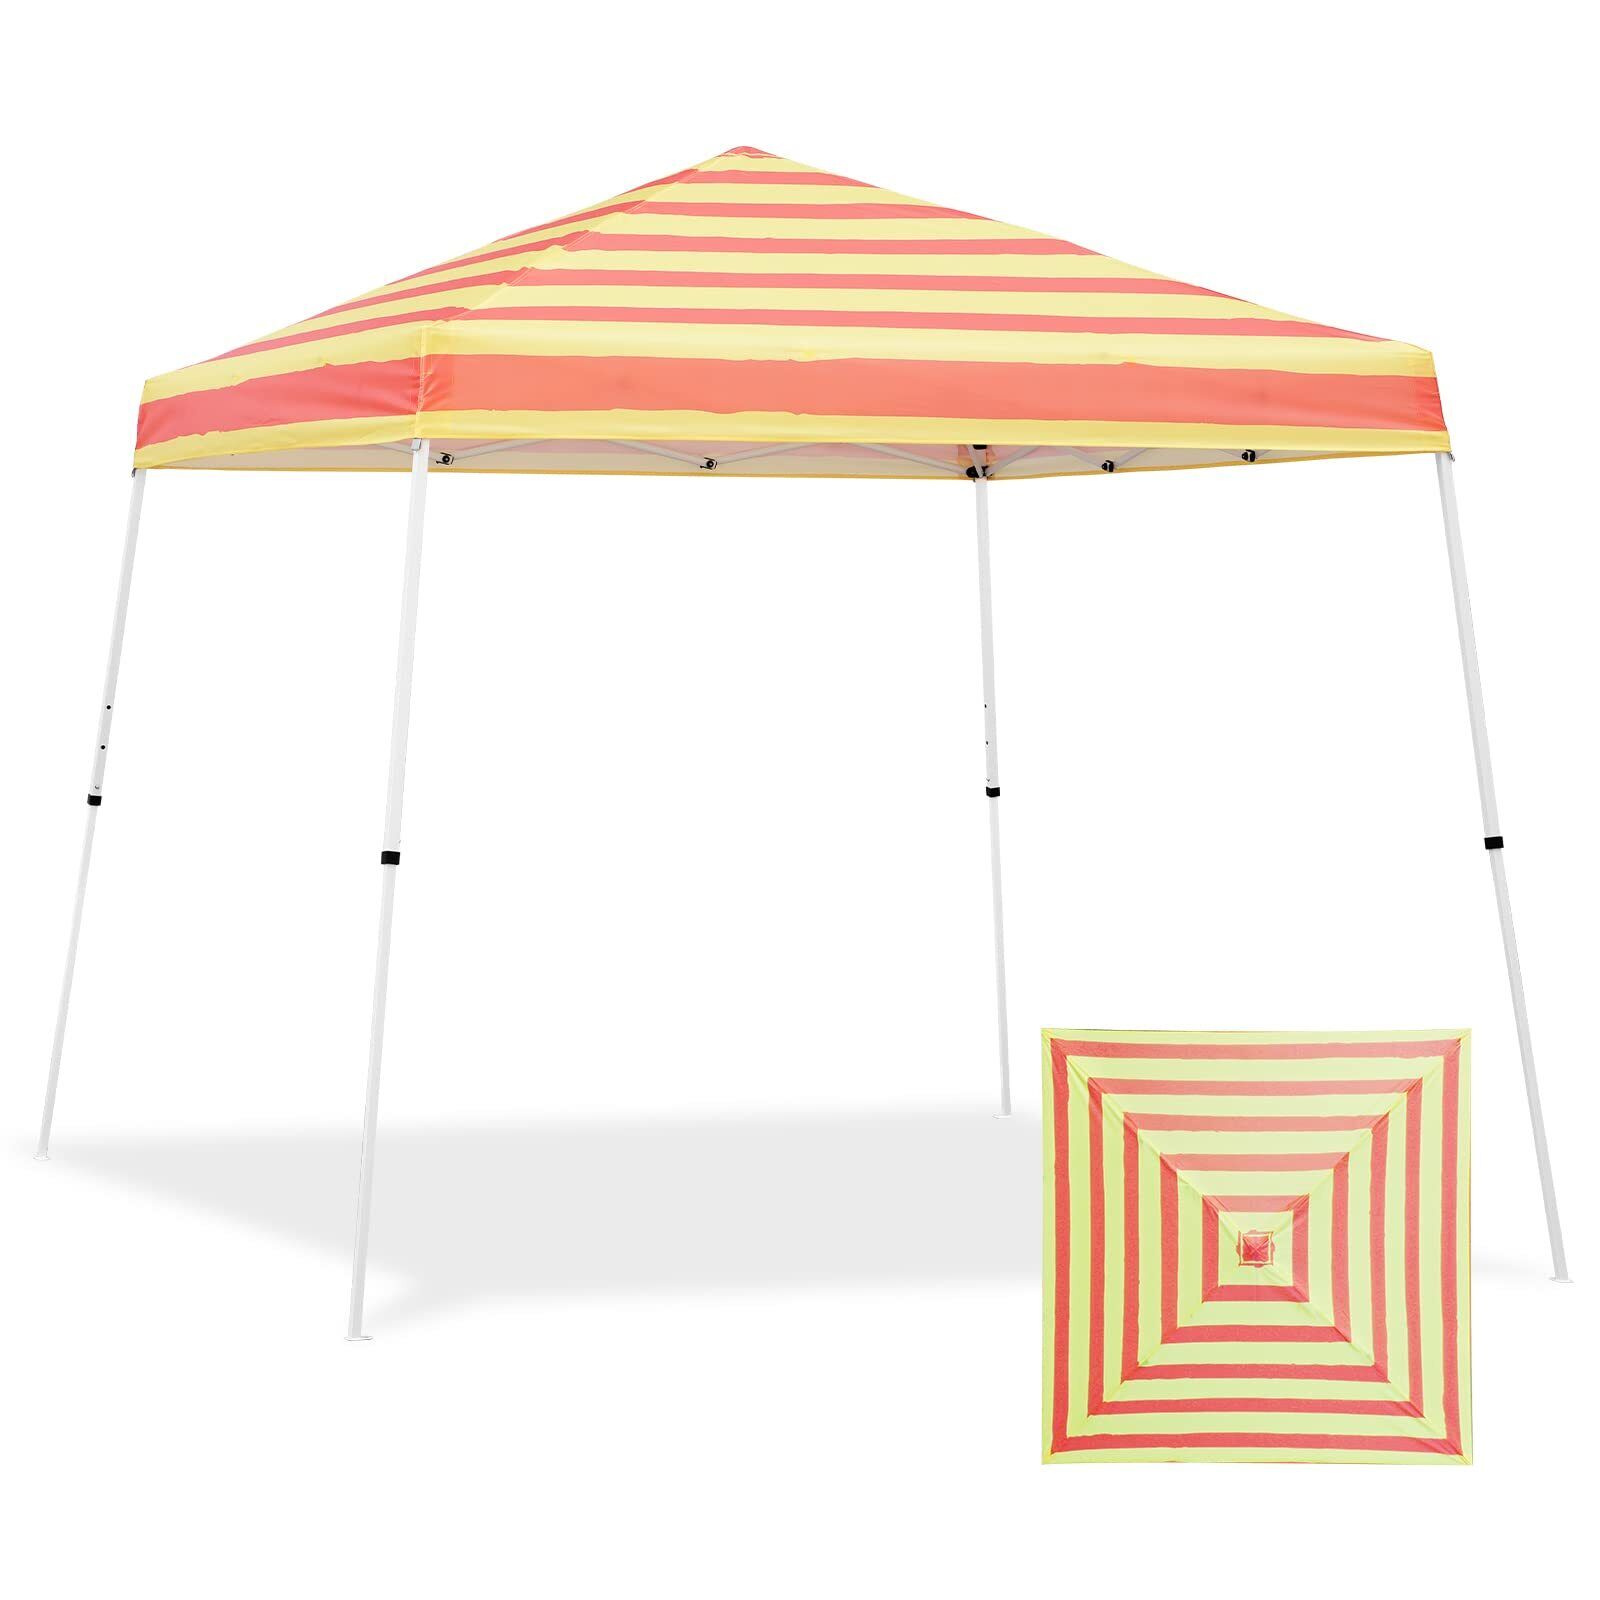 10x10 Slant Leg Pop-up Canopy Tent Easy One Person Setup Instant Outdoor Beac...